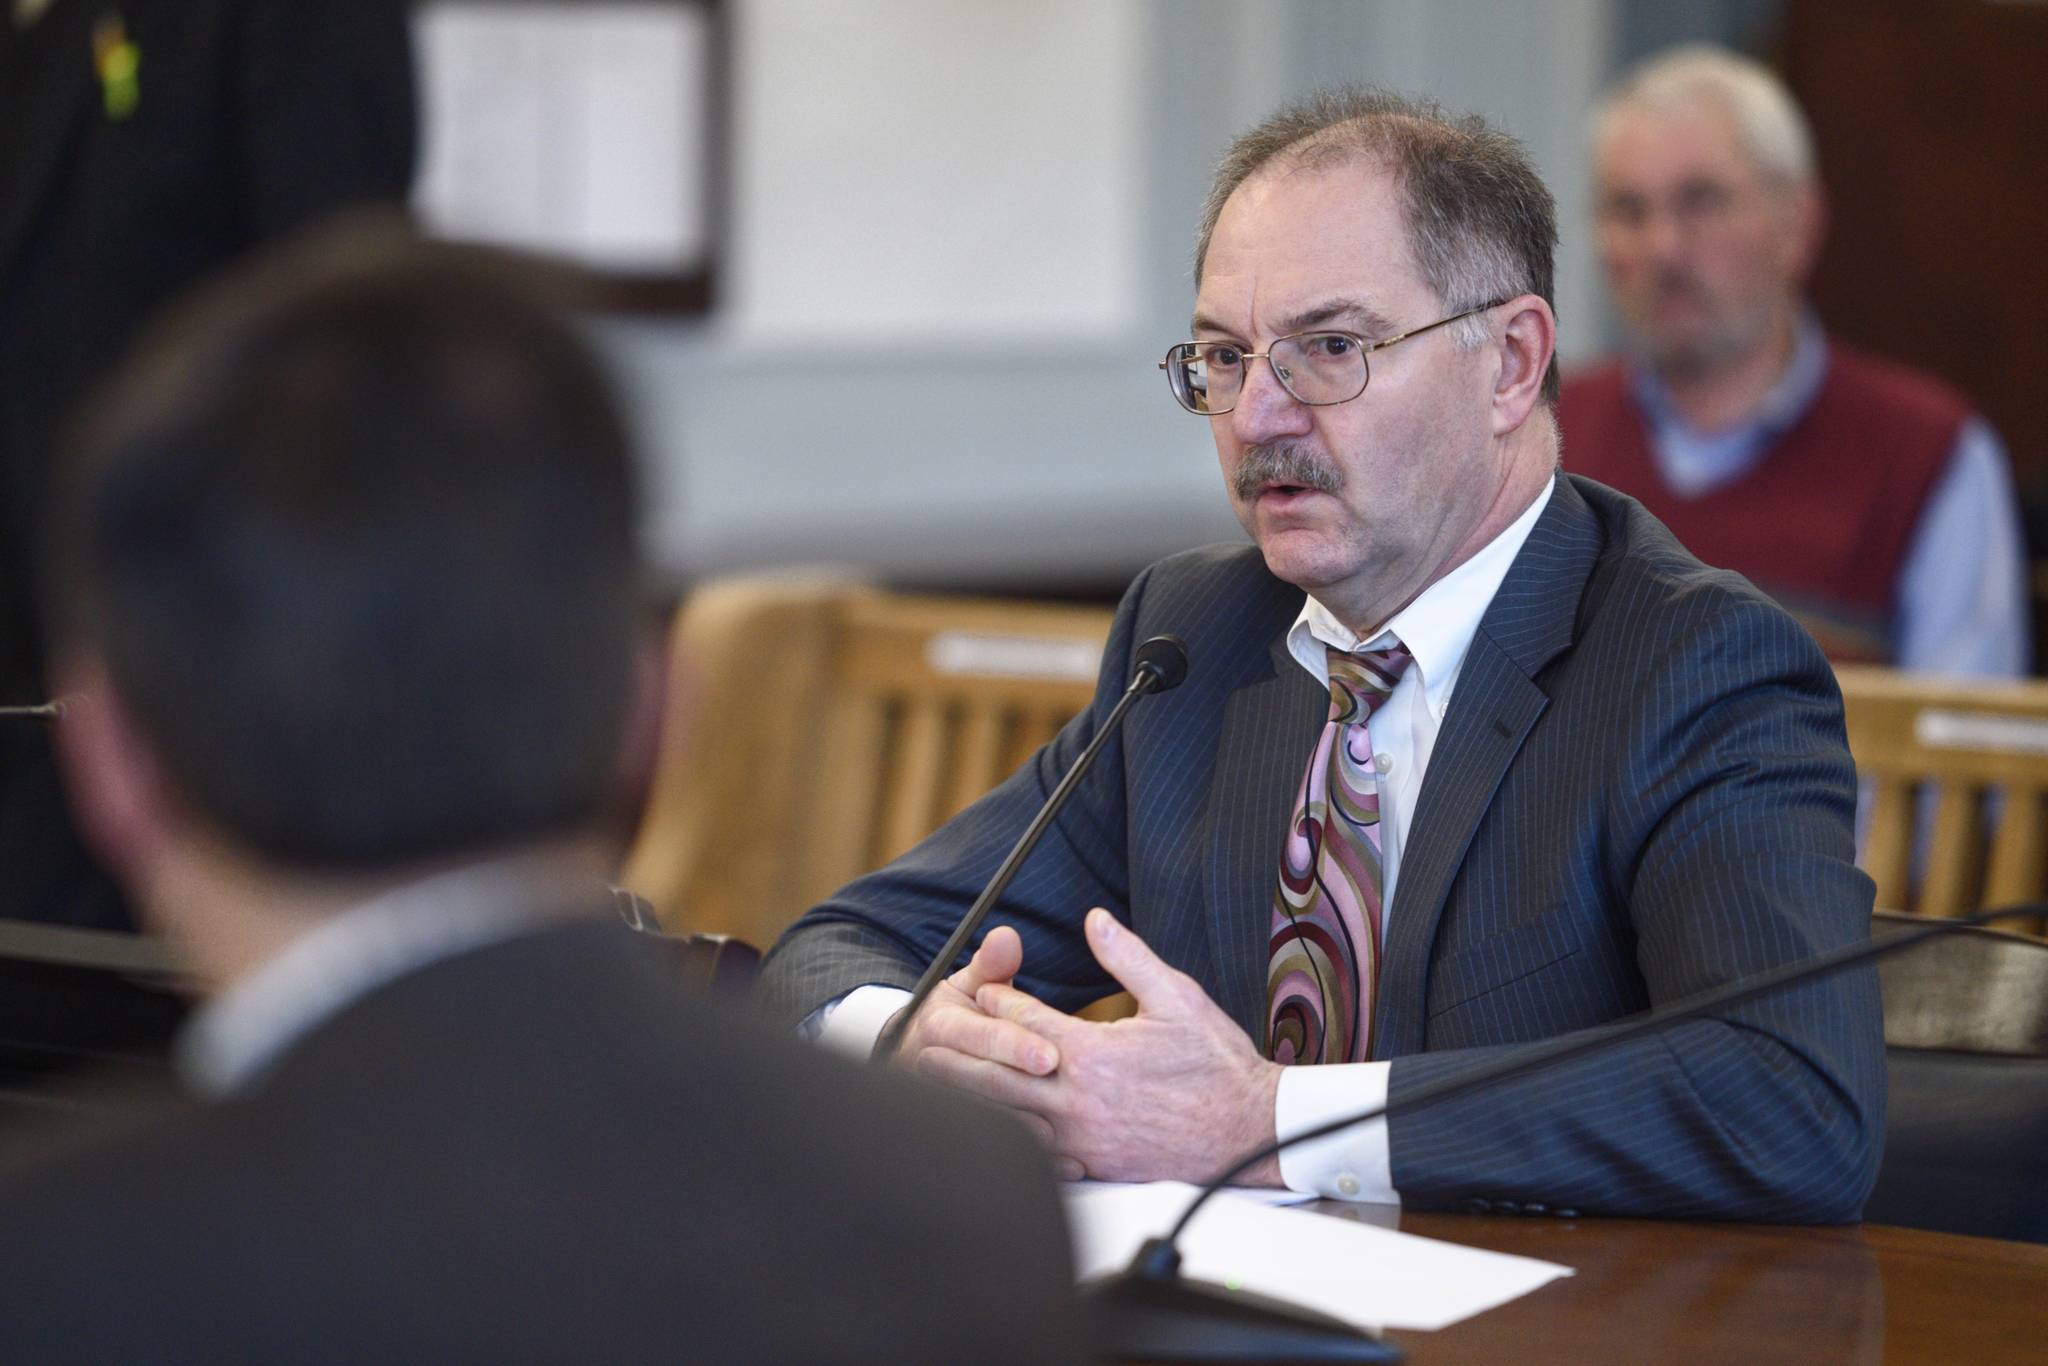 David Teal, Director of the Legislative Finance Division, gives his analysis of Gov. Mike Dunleavy’s state budget to the Senate Finance Committee at the Capitol on Tuesday, Feb. 26, 2019. (Michael Penn | Juneau Empire File)